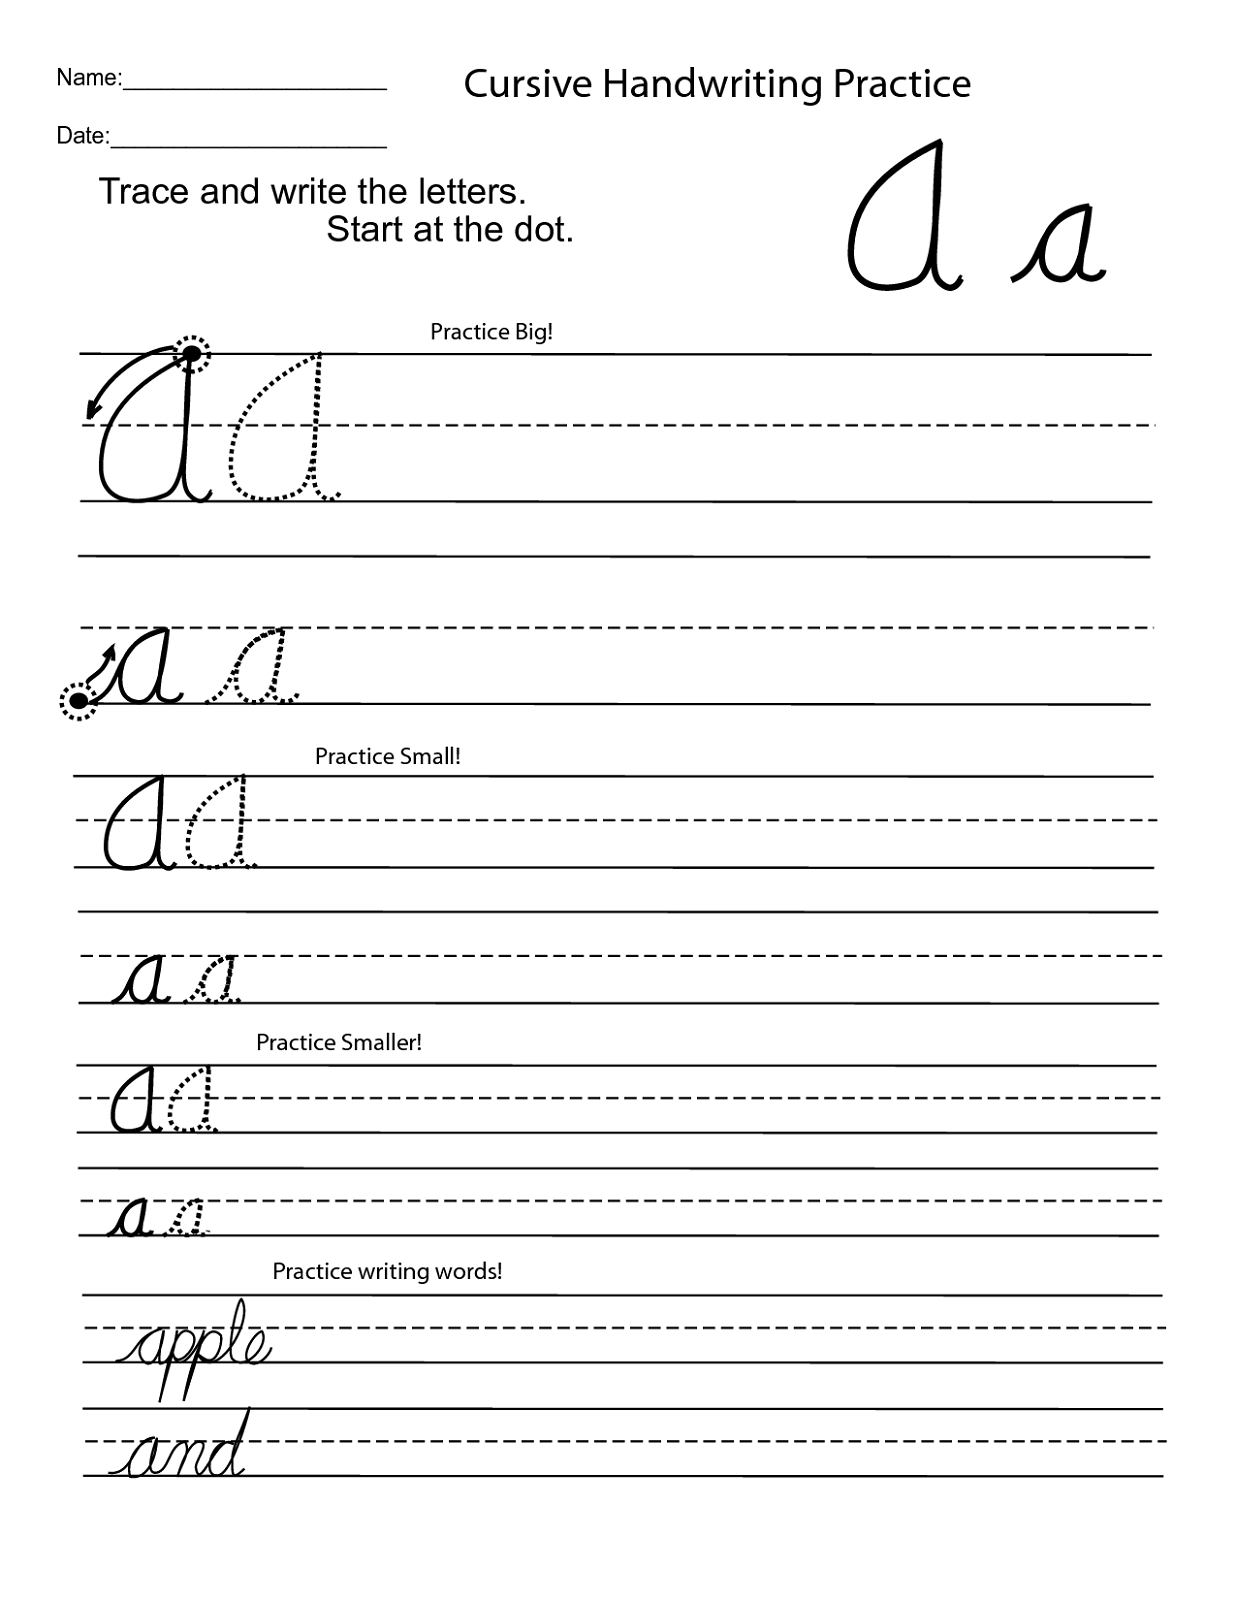 handwriting-worksheets-for-2nd-grade